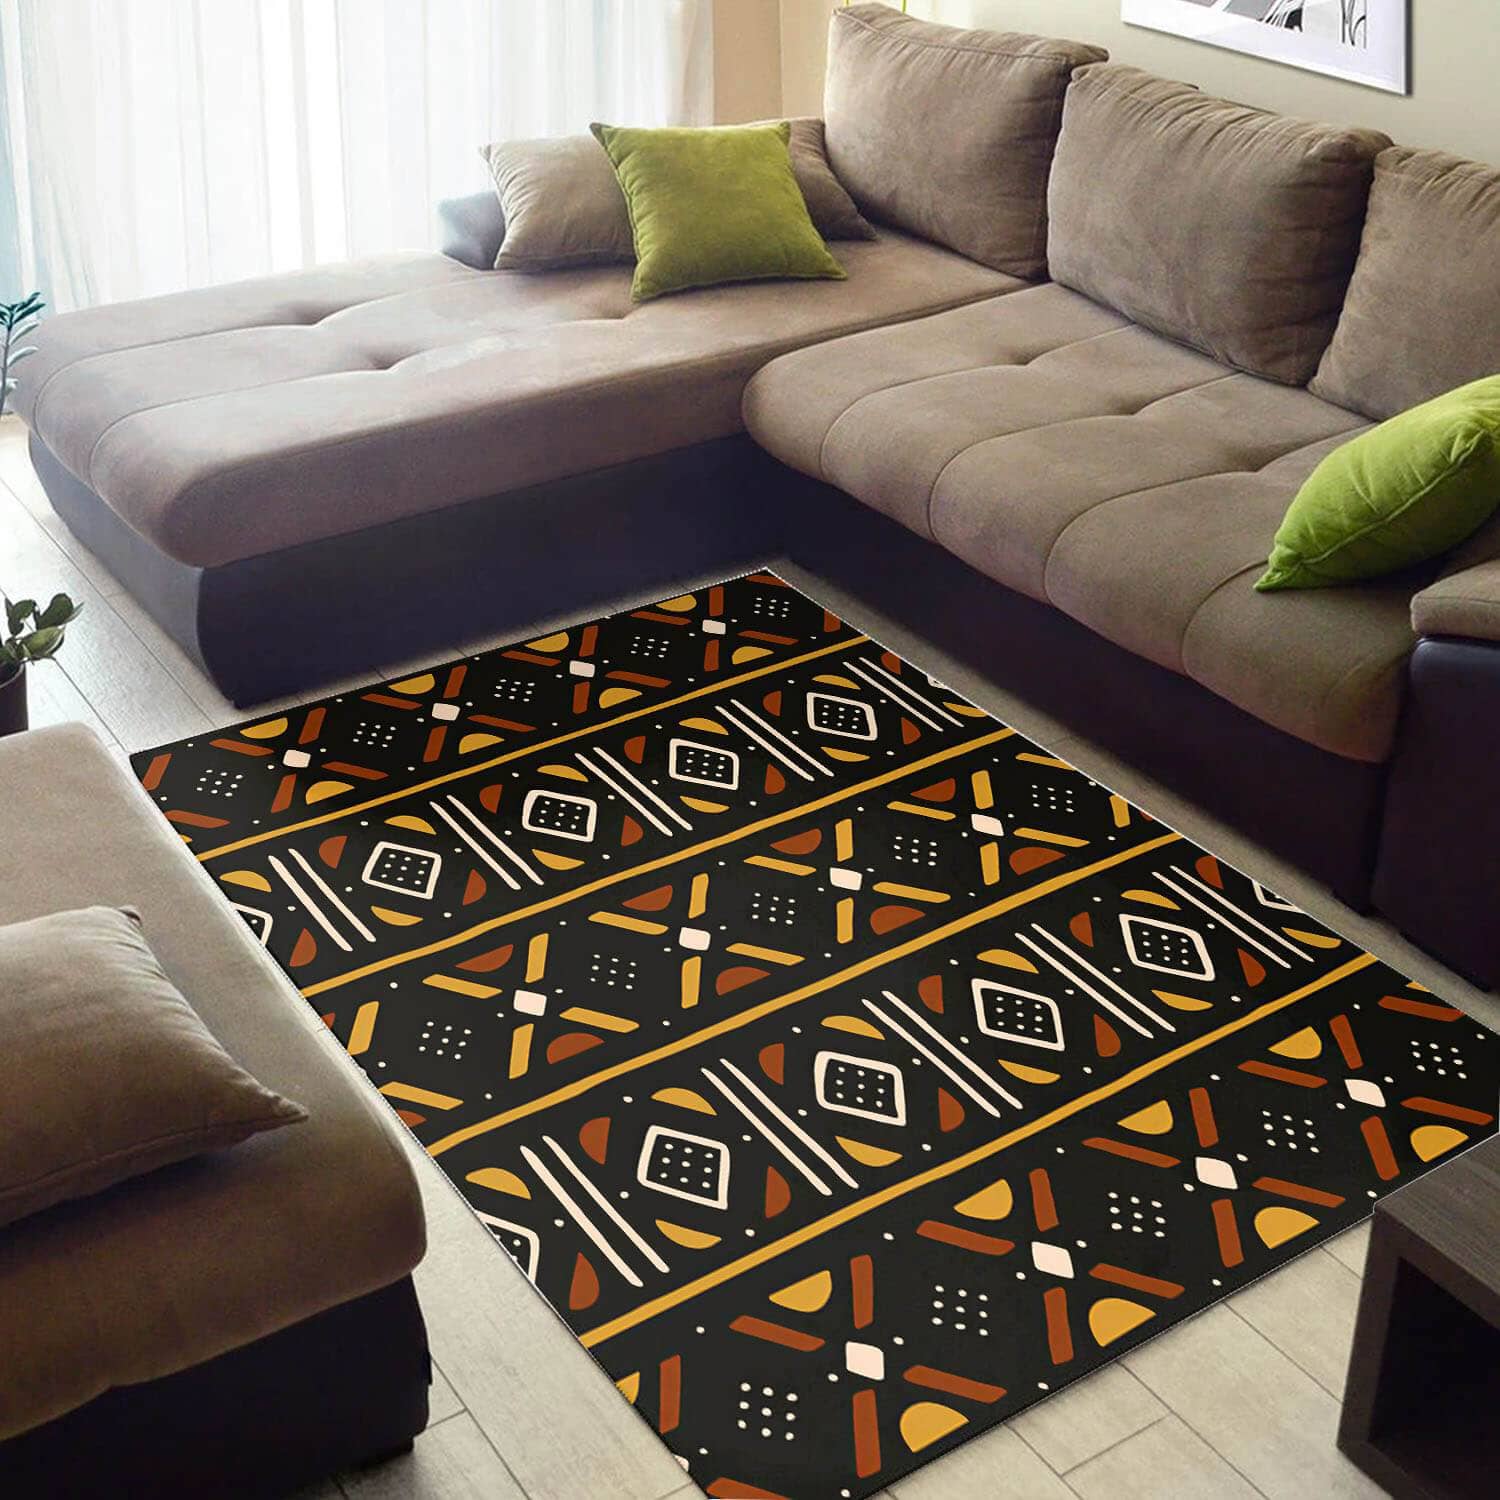 Trendy African American Adorable Inspired Ethnic Seamless Pattern Themed Carpet Style Rug